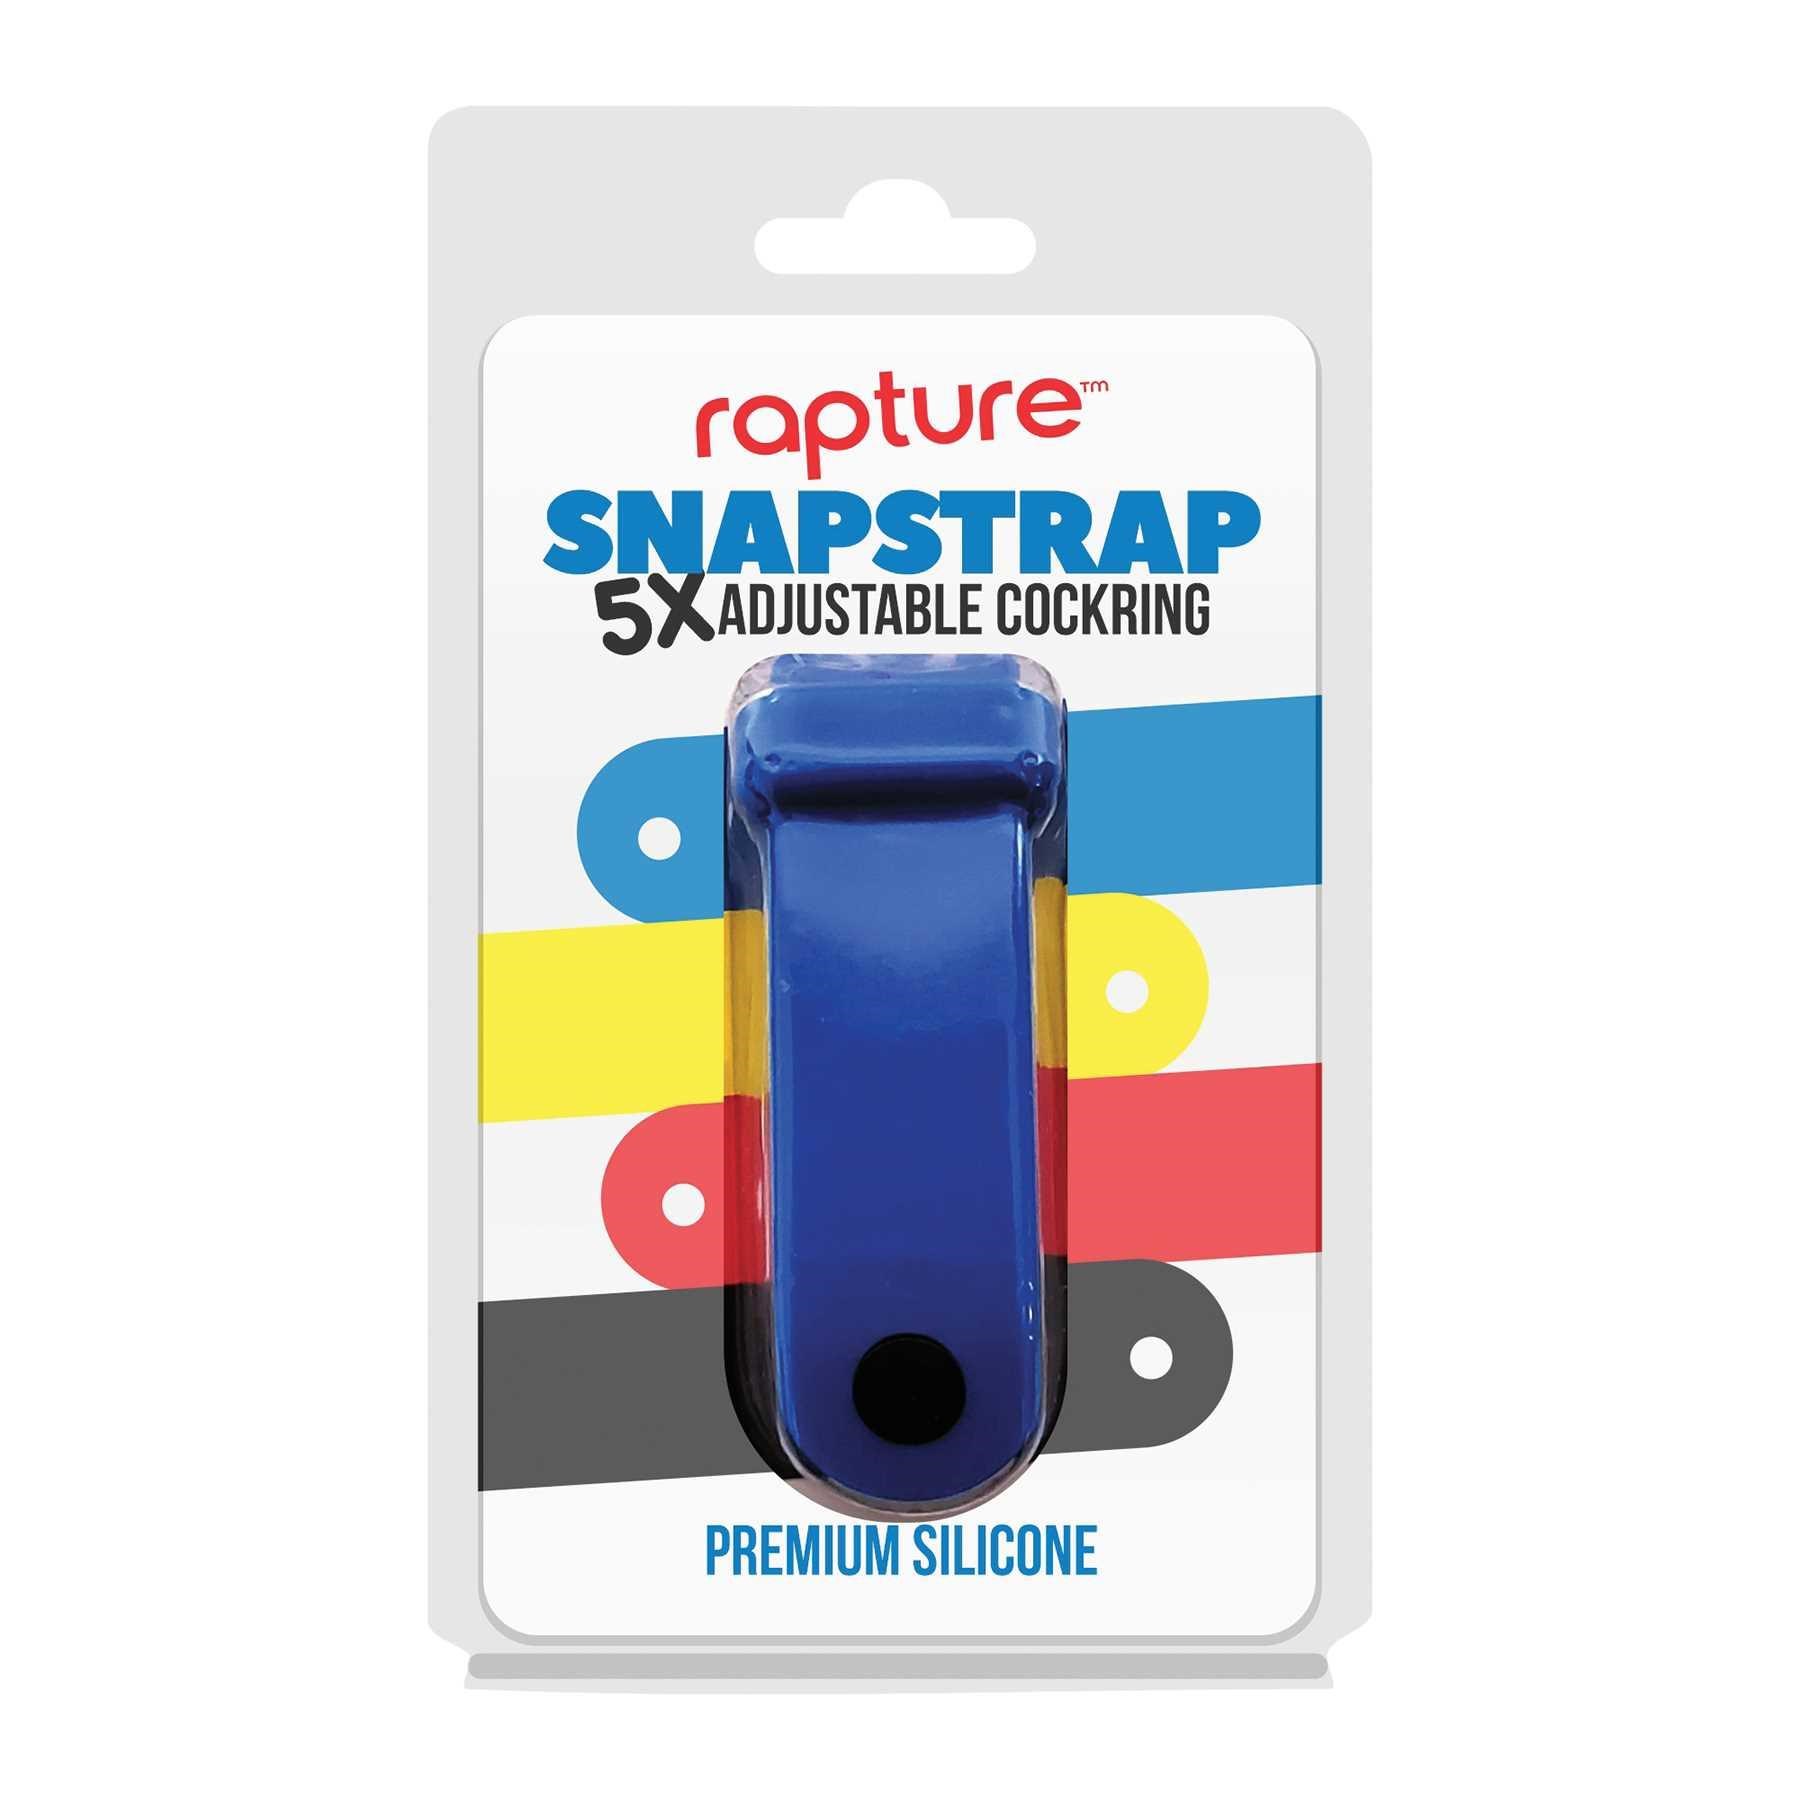 SNAPSTRAP 5X SILICONE COCKRING blue packaging